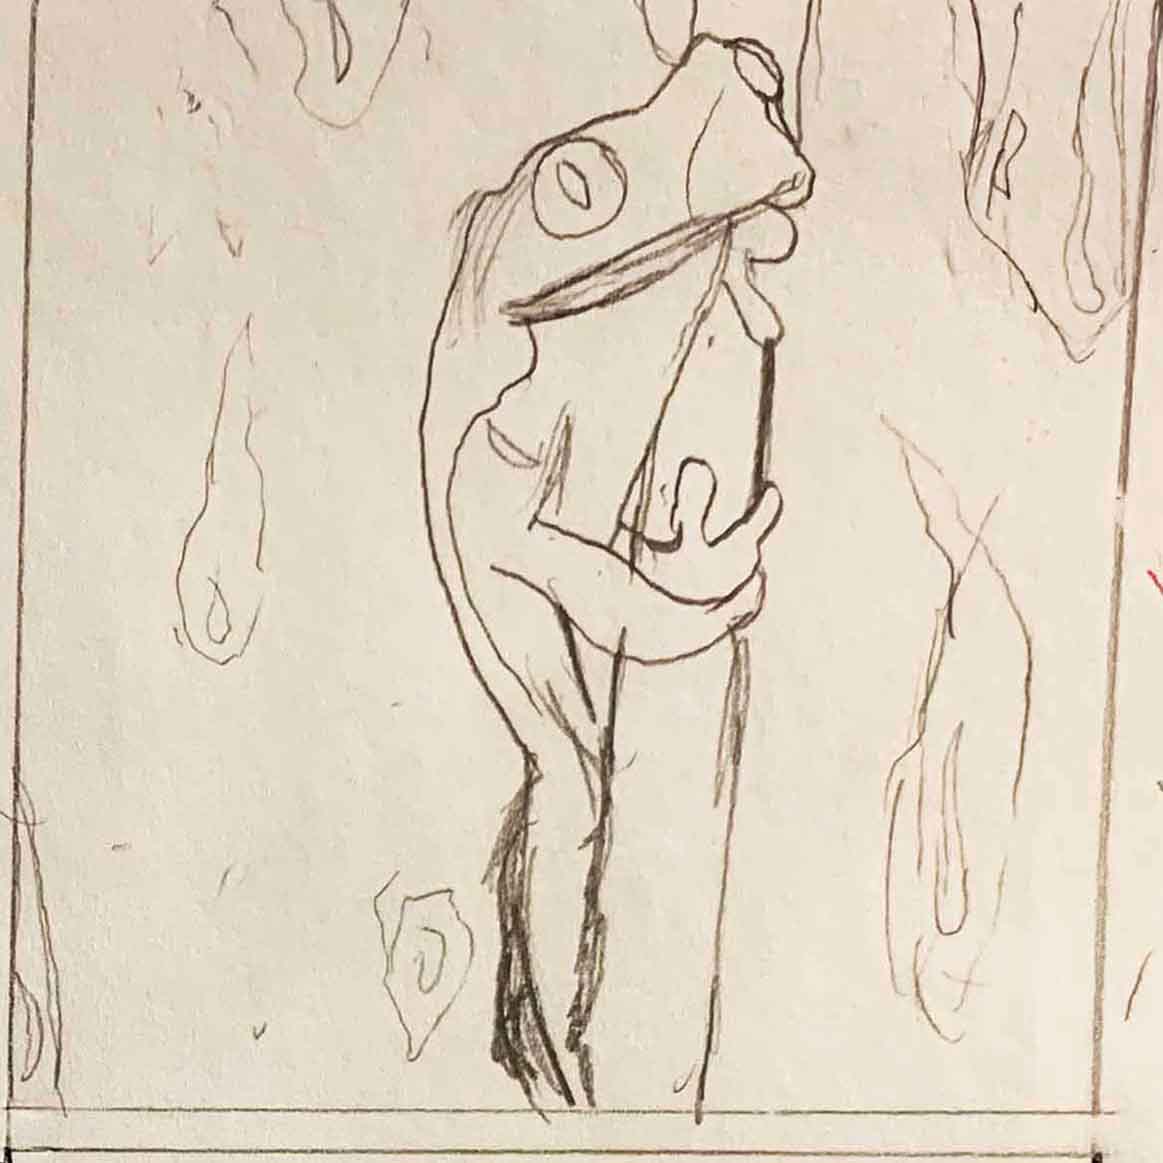 thumbnails for letter F drop cap. illustration of a green tree frog reaching out from a branch